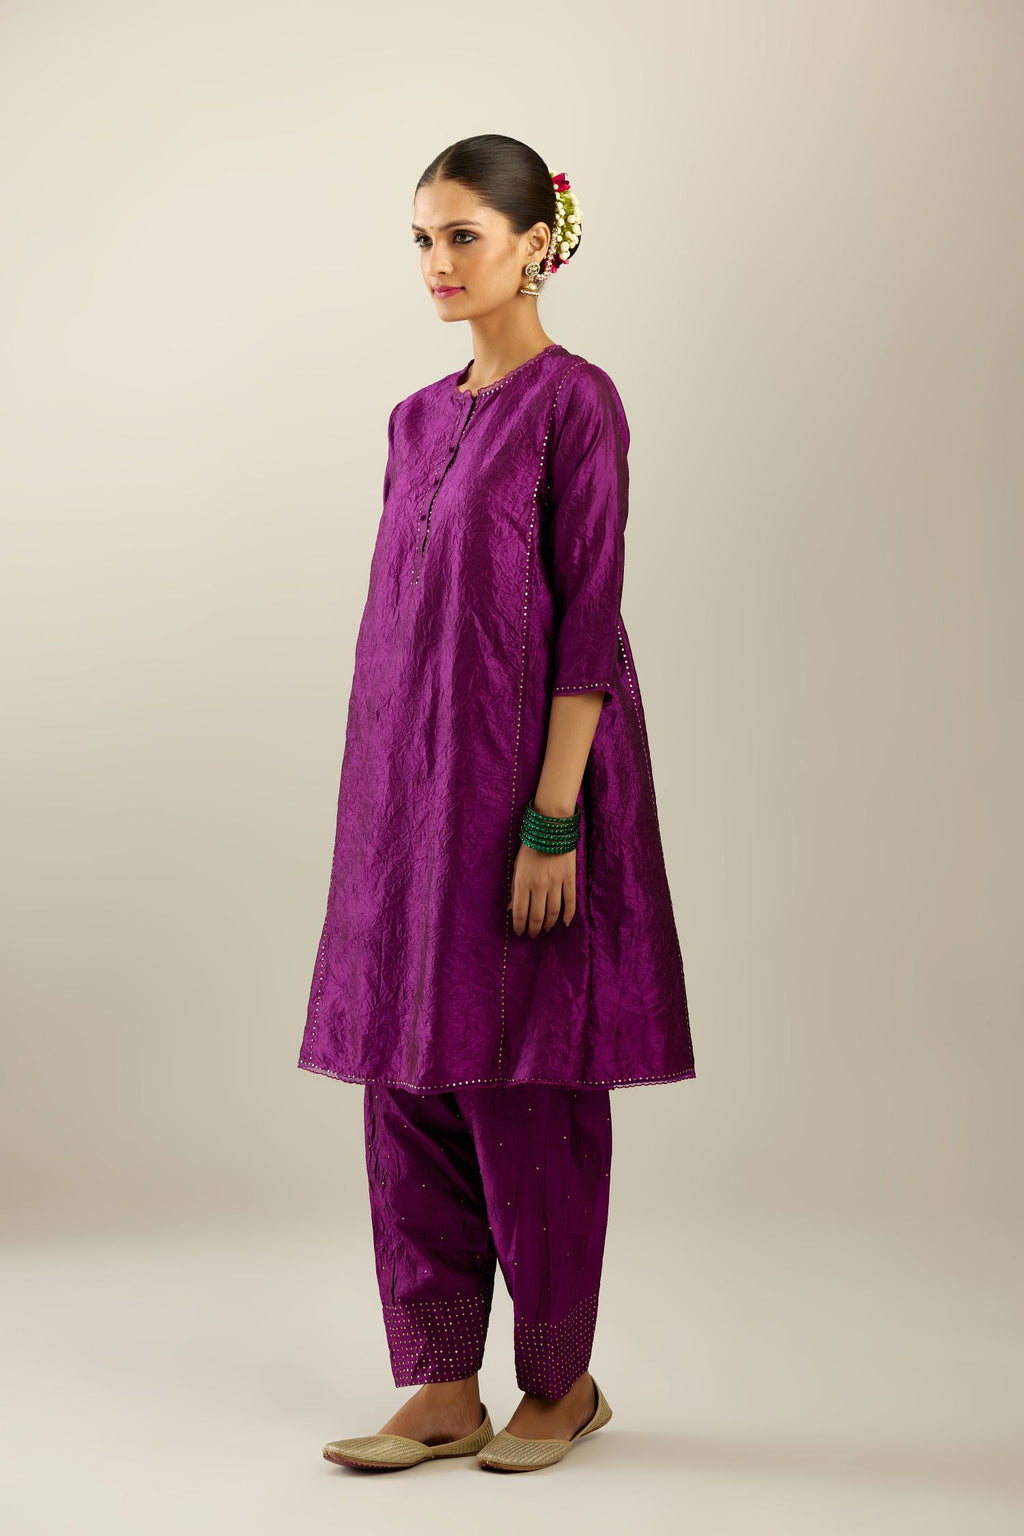 Silk hand crushed short kalidar kurta set with button placket, highlighted with gold sequins and embroidered scalloped organza at edges.